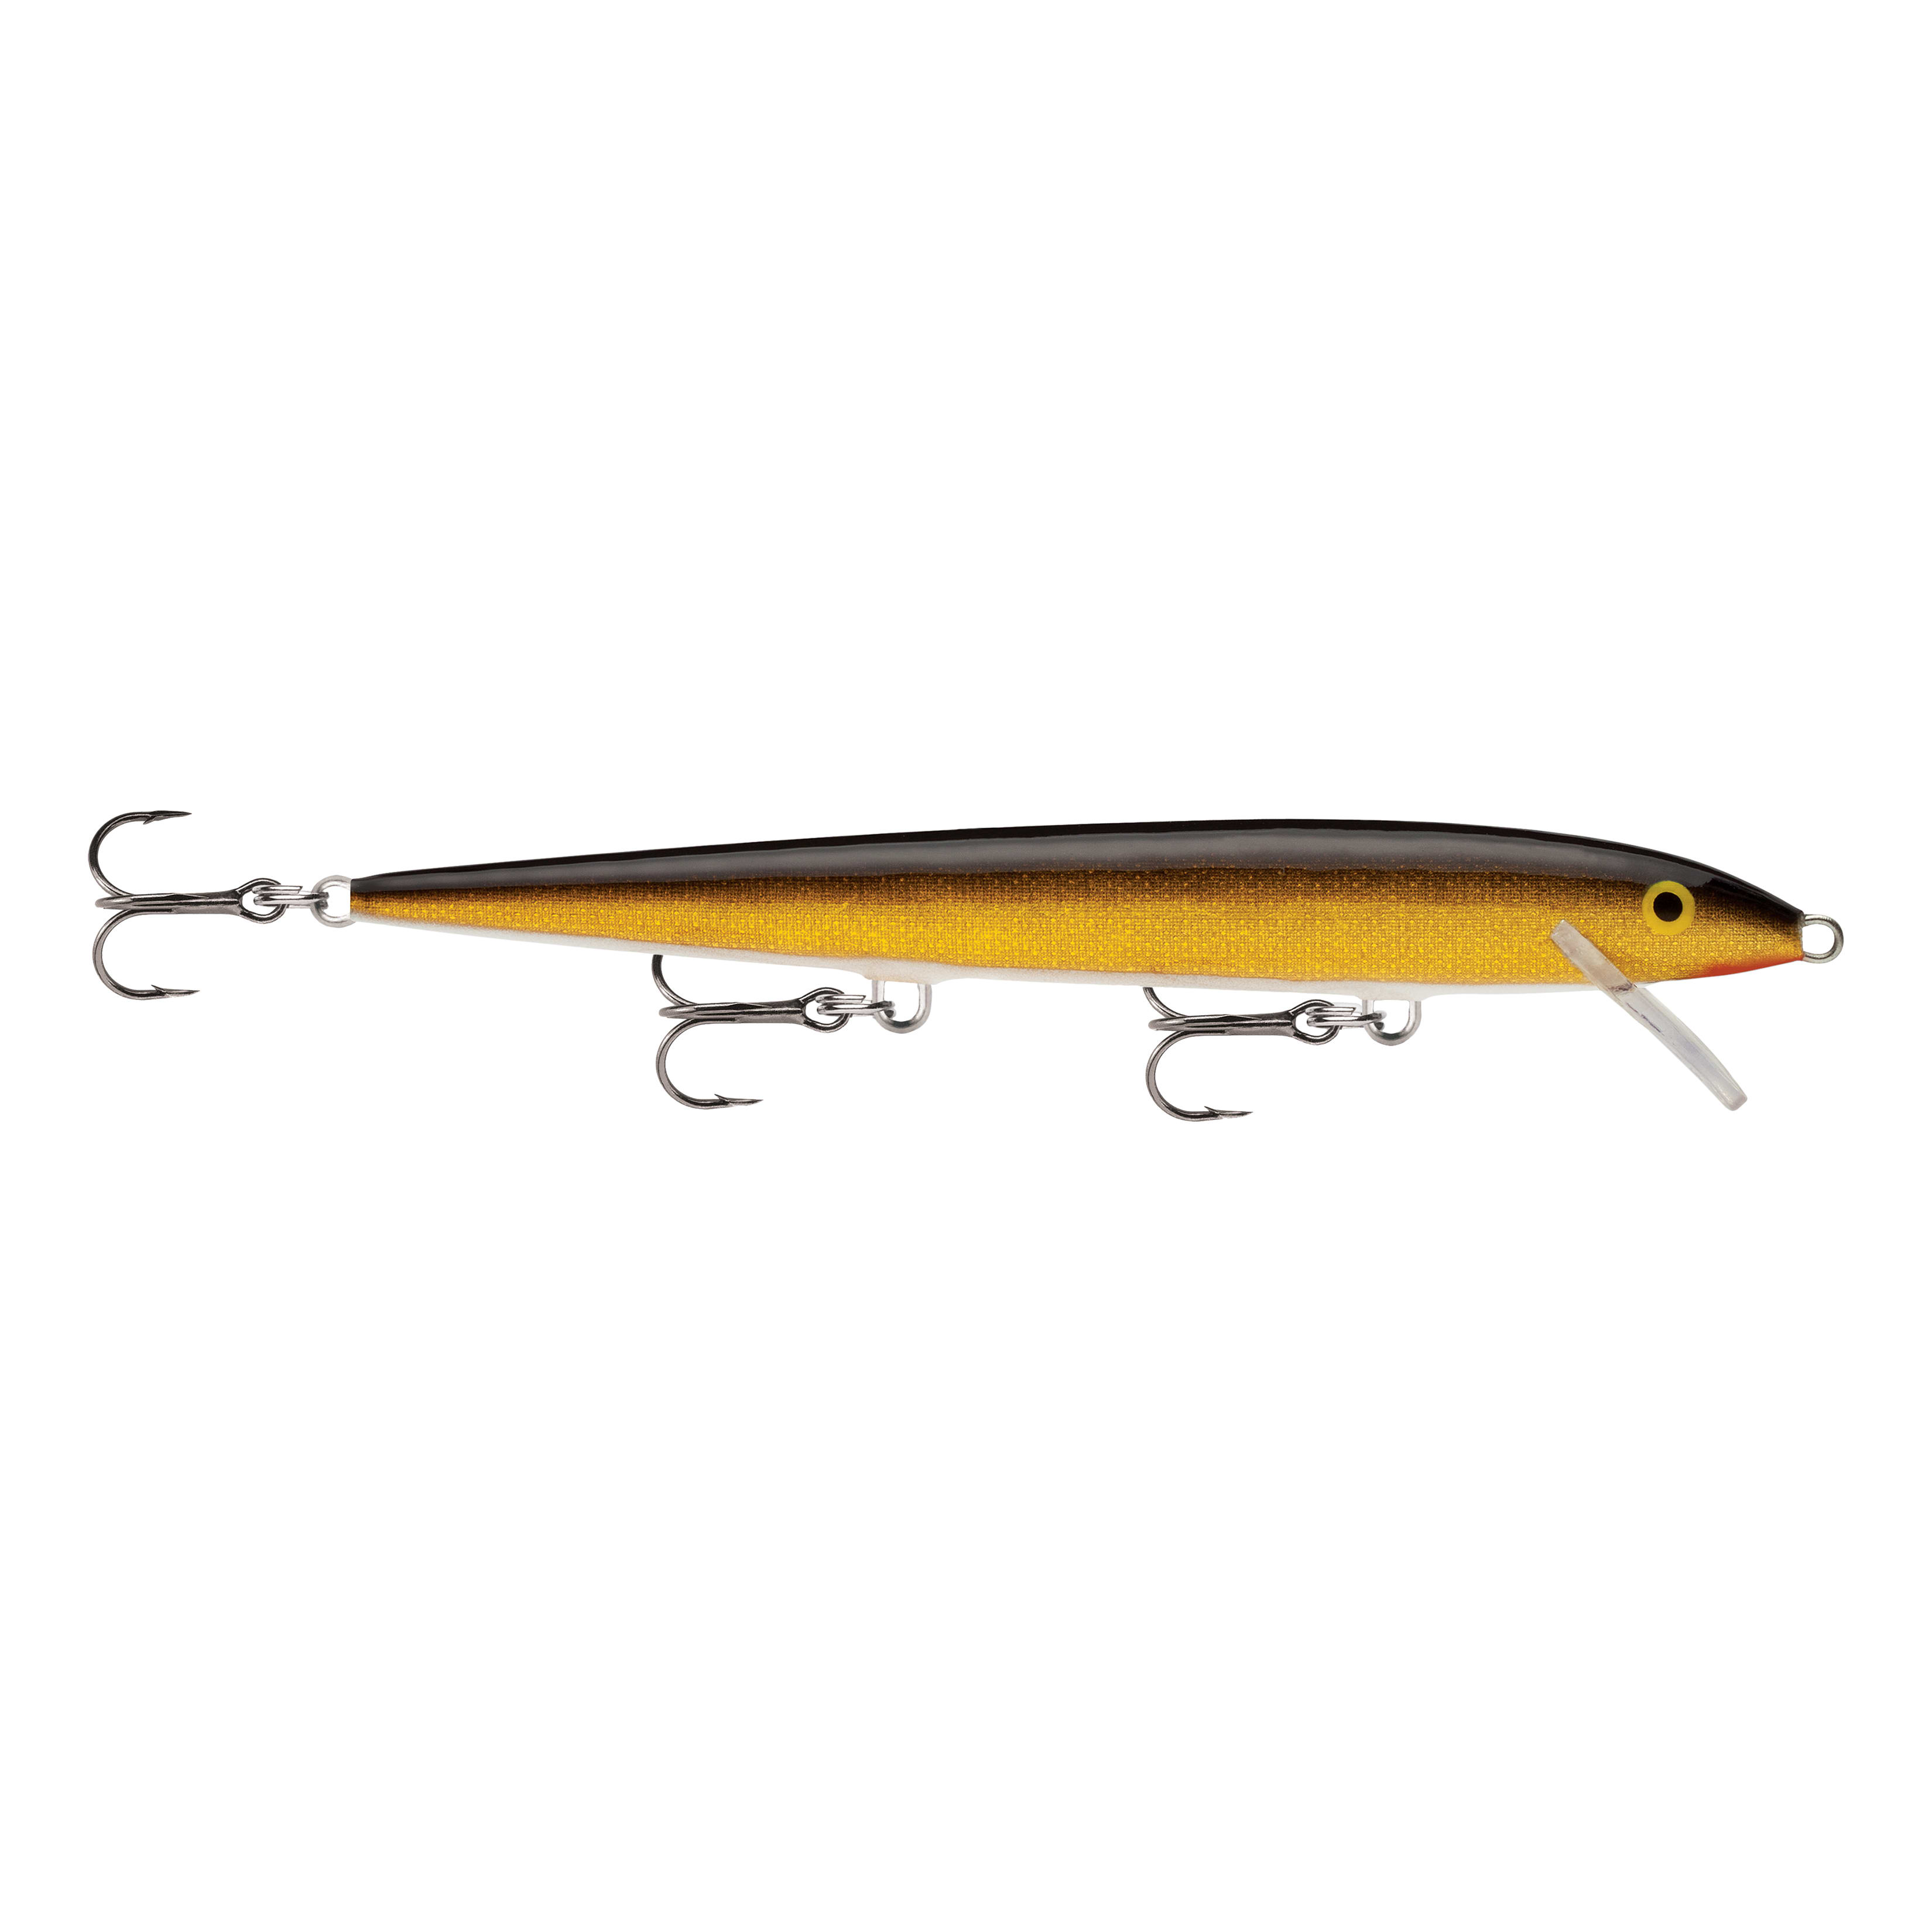  Rapala Countdown 05 Fishing lure, 2-Inch, Blue : Everything Else